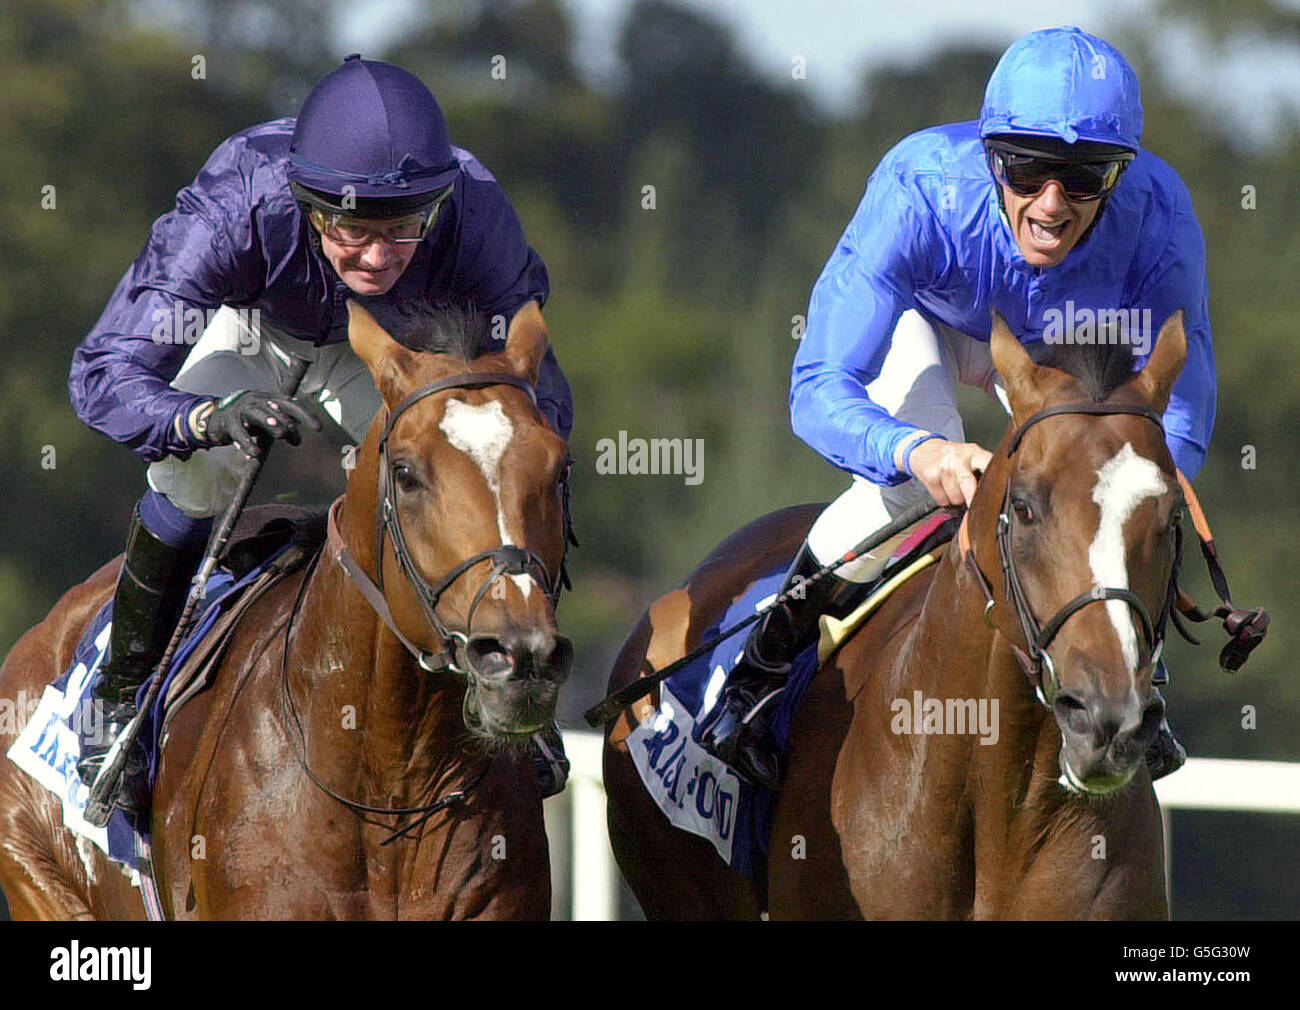 Frankie Dettori riding Fantastic Light (R) shouts for joy as they beat Galileo ridden by Mick Kinane to win the Ireland The Food Island Irish Champion Stakes at Leopardstown, in the Republic of Ireland. Stock Photo